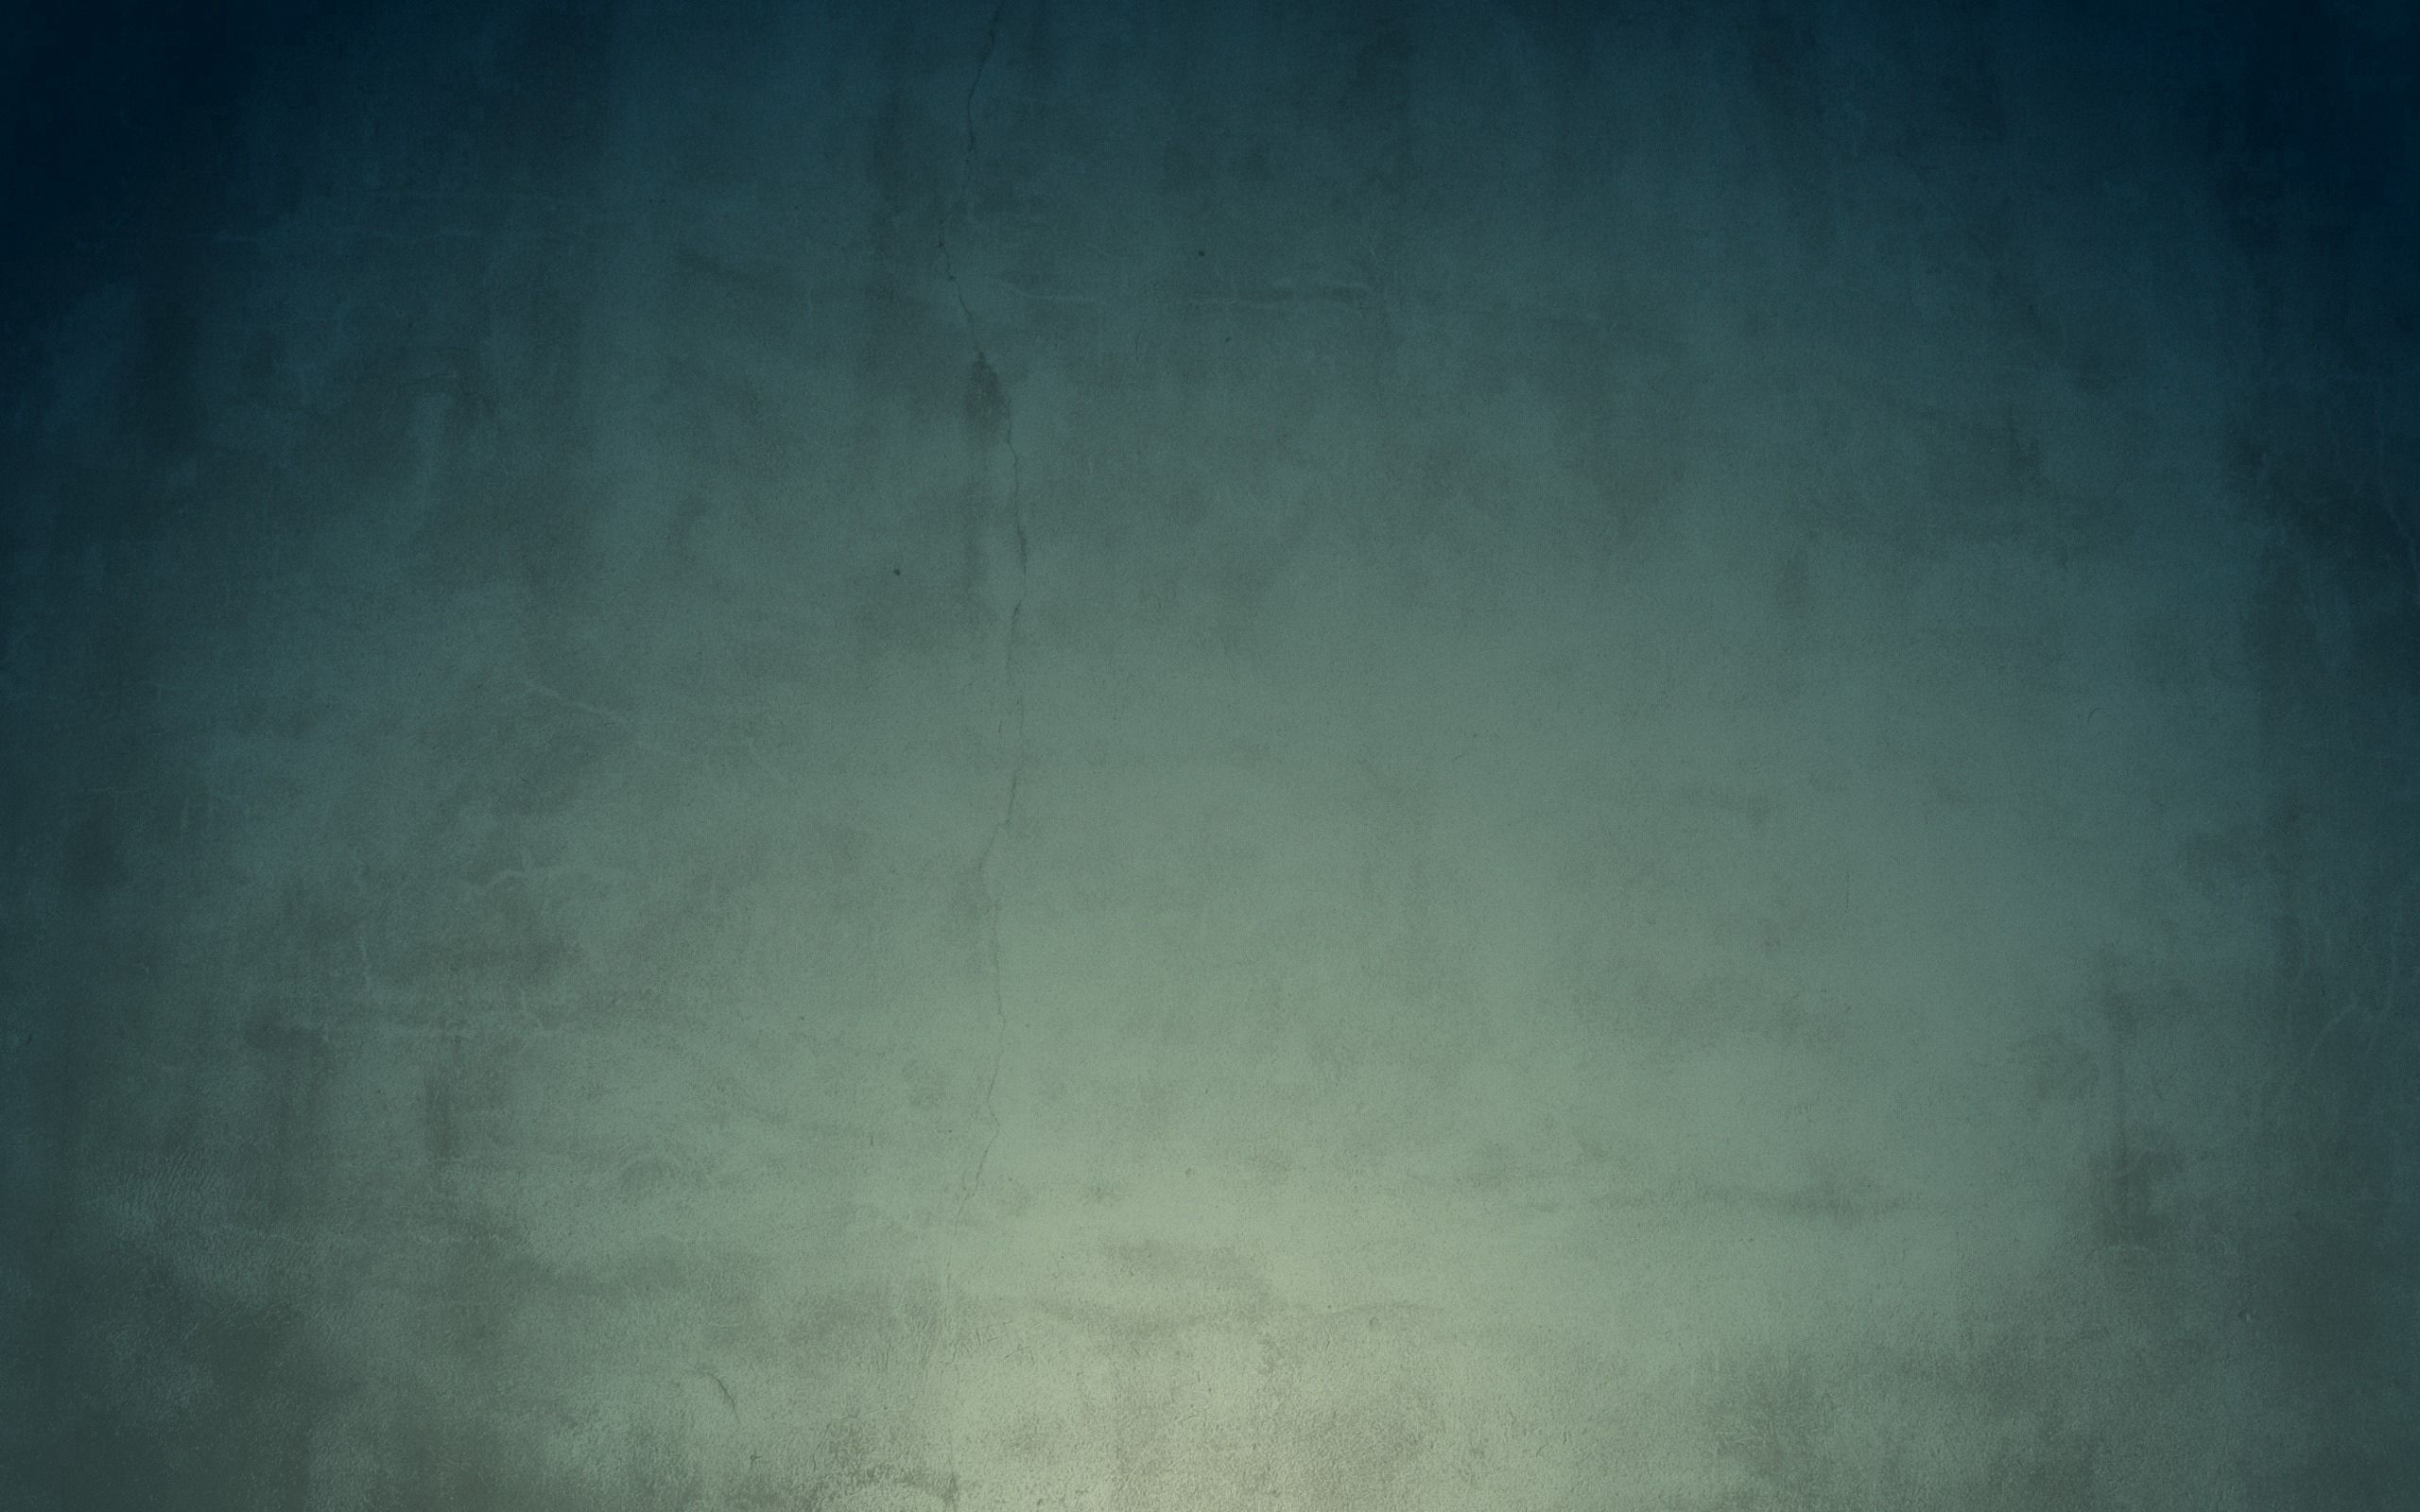 Smartphone Background stains, light, textures, shadow